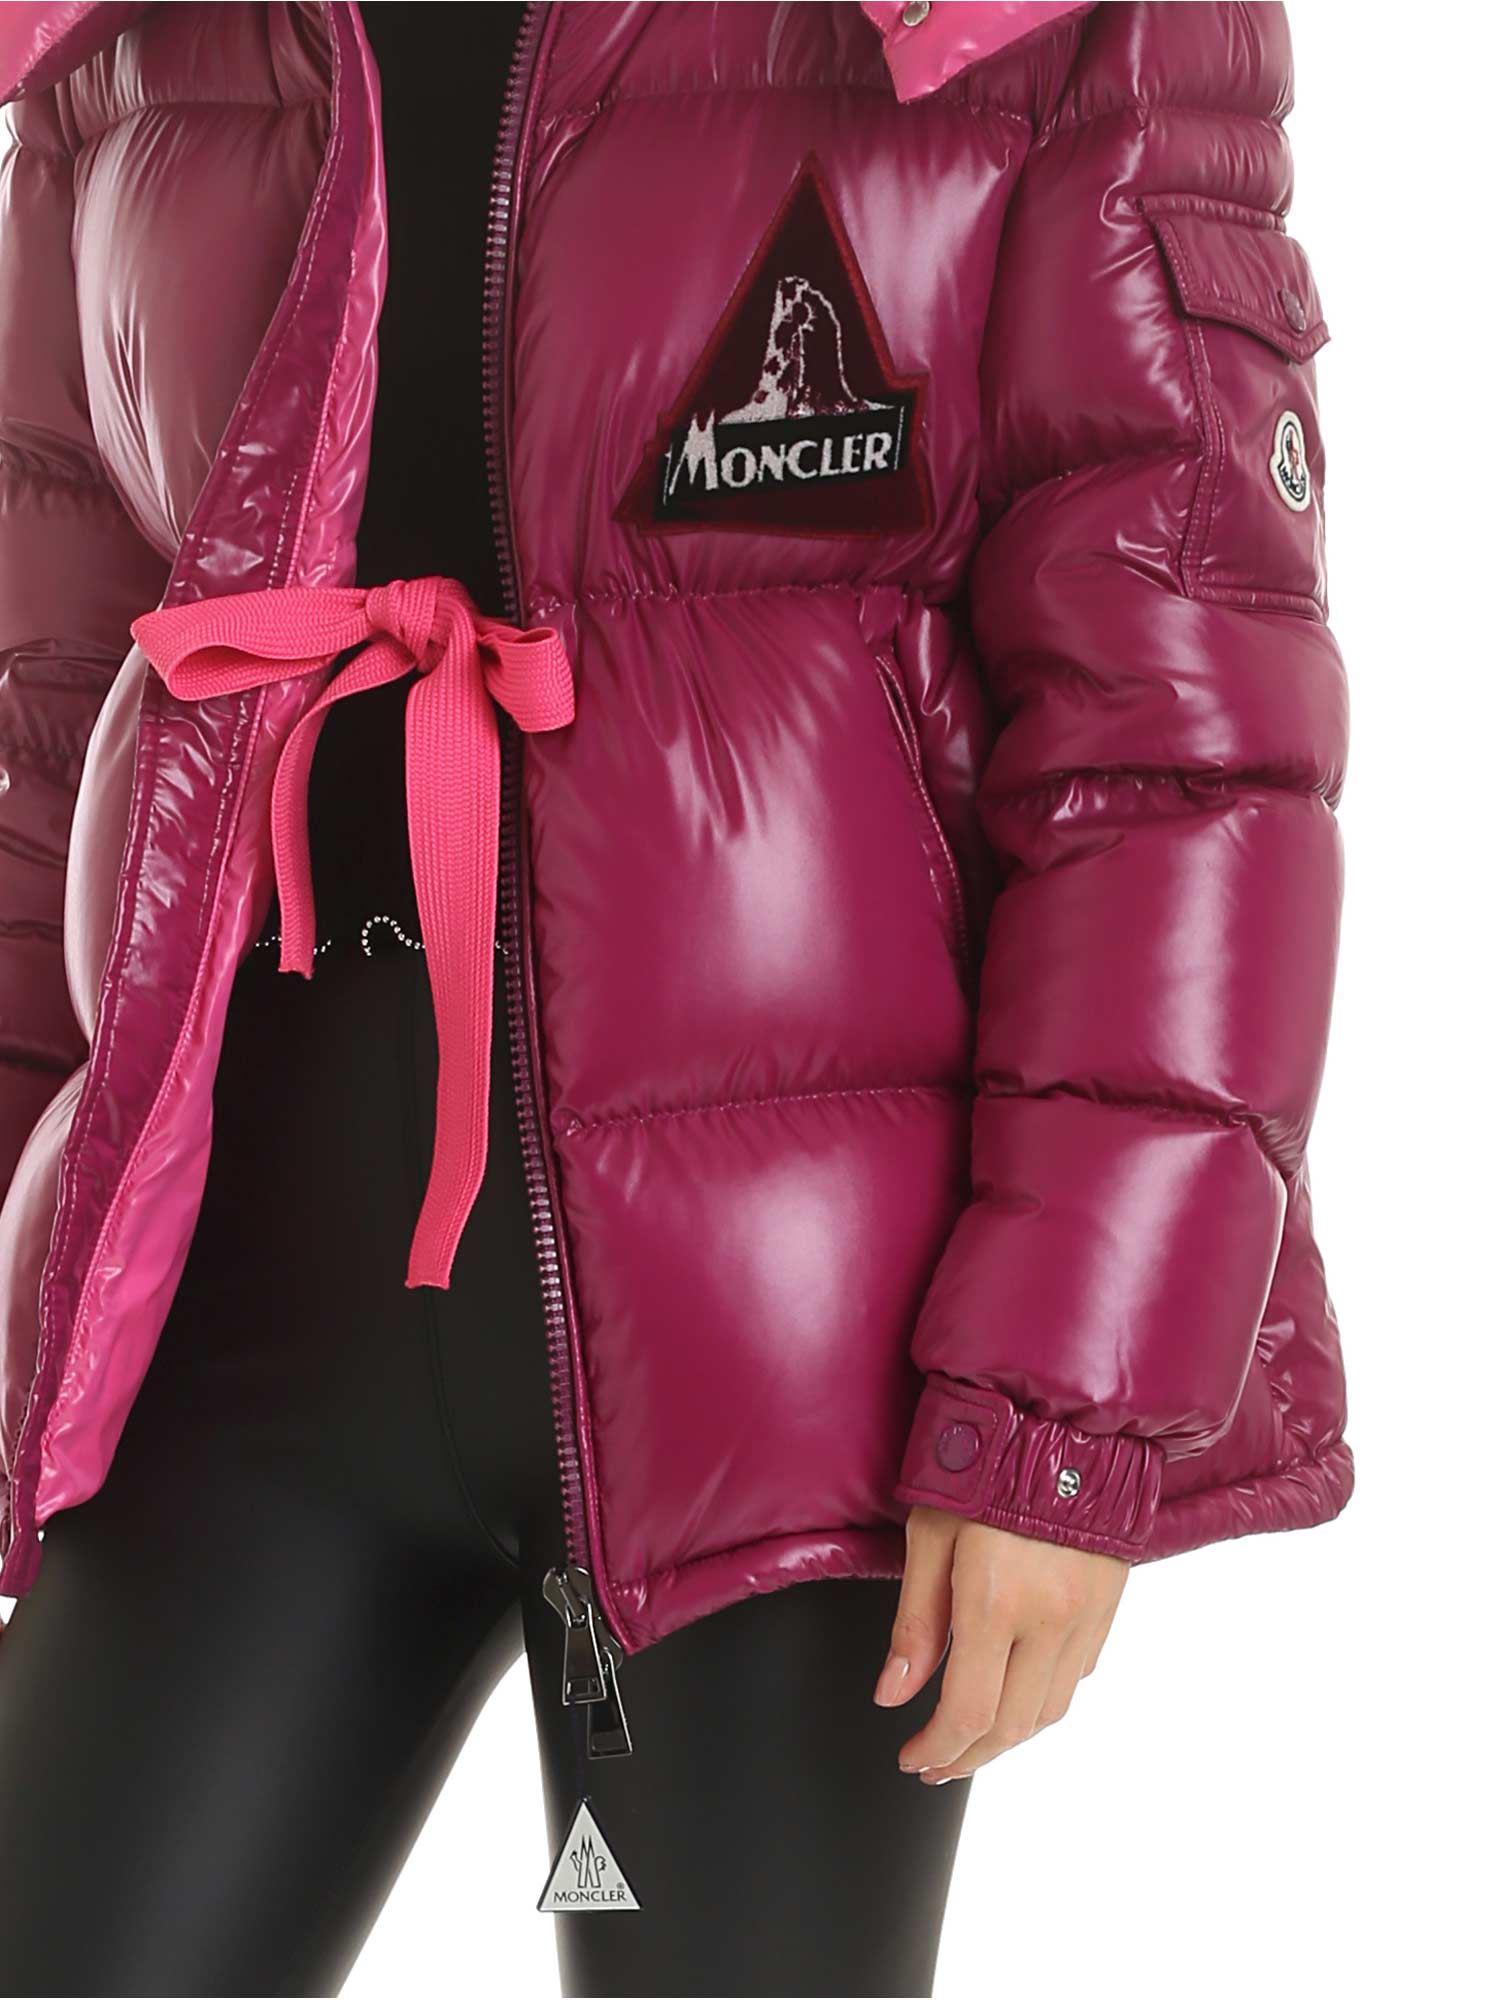 Moncler Synthetic 'wilson' Down Jacket in Purple - Lyst